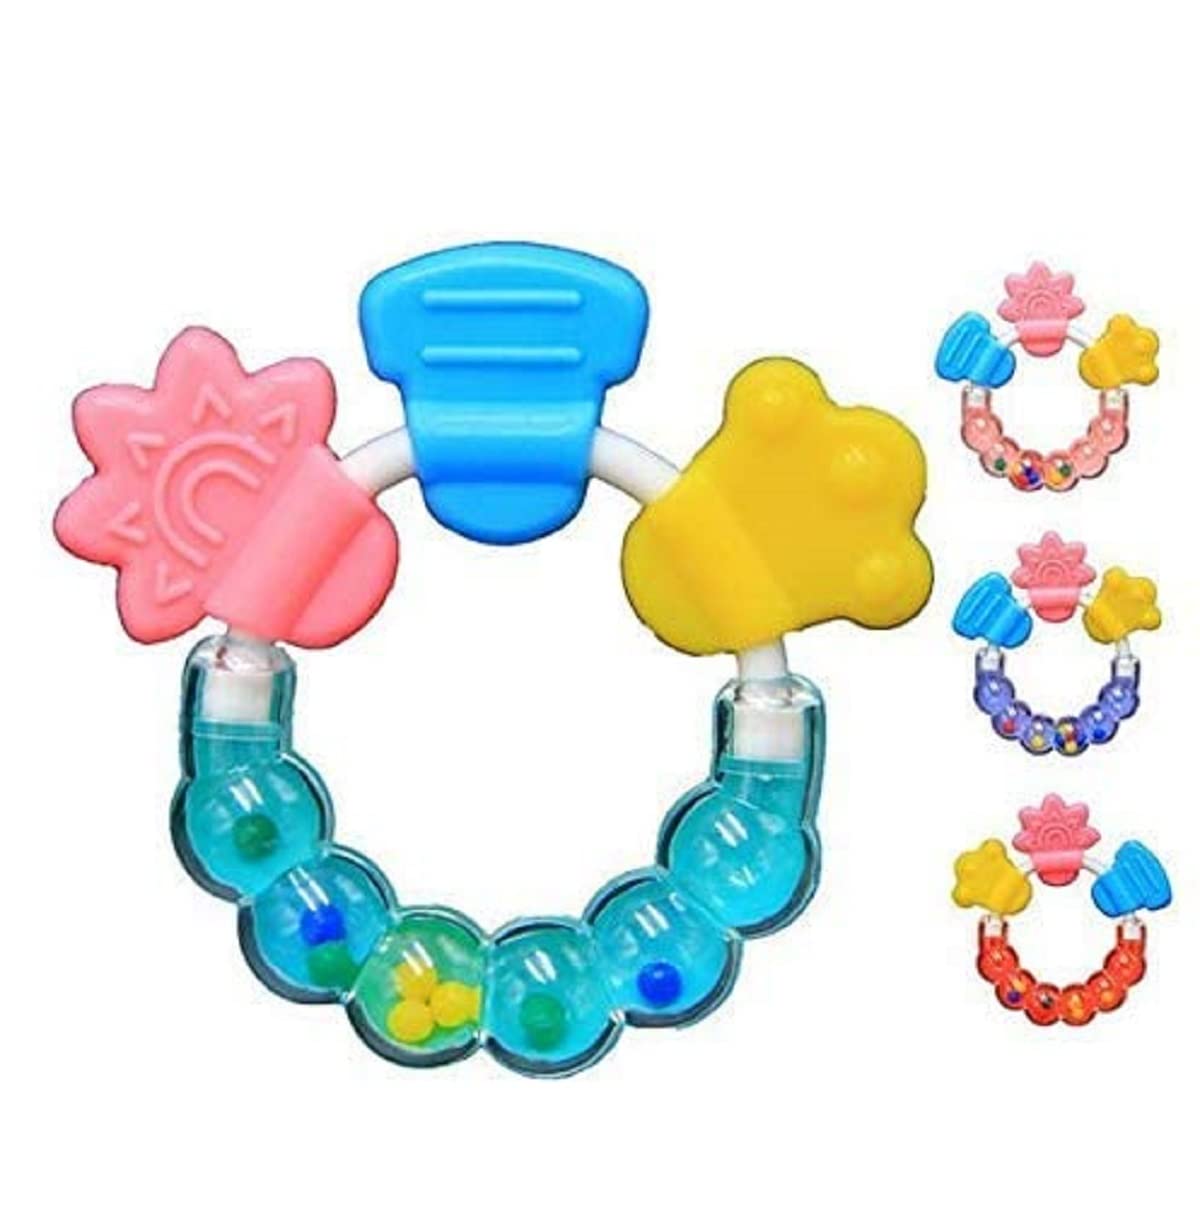 Teething Toys for Baby with Textured Surface for Infants and Babies